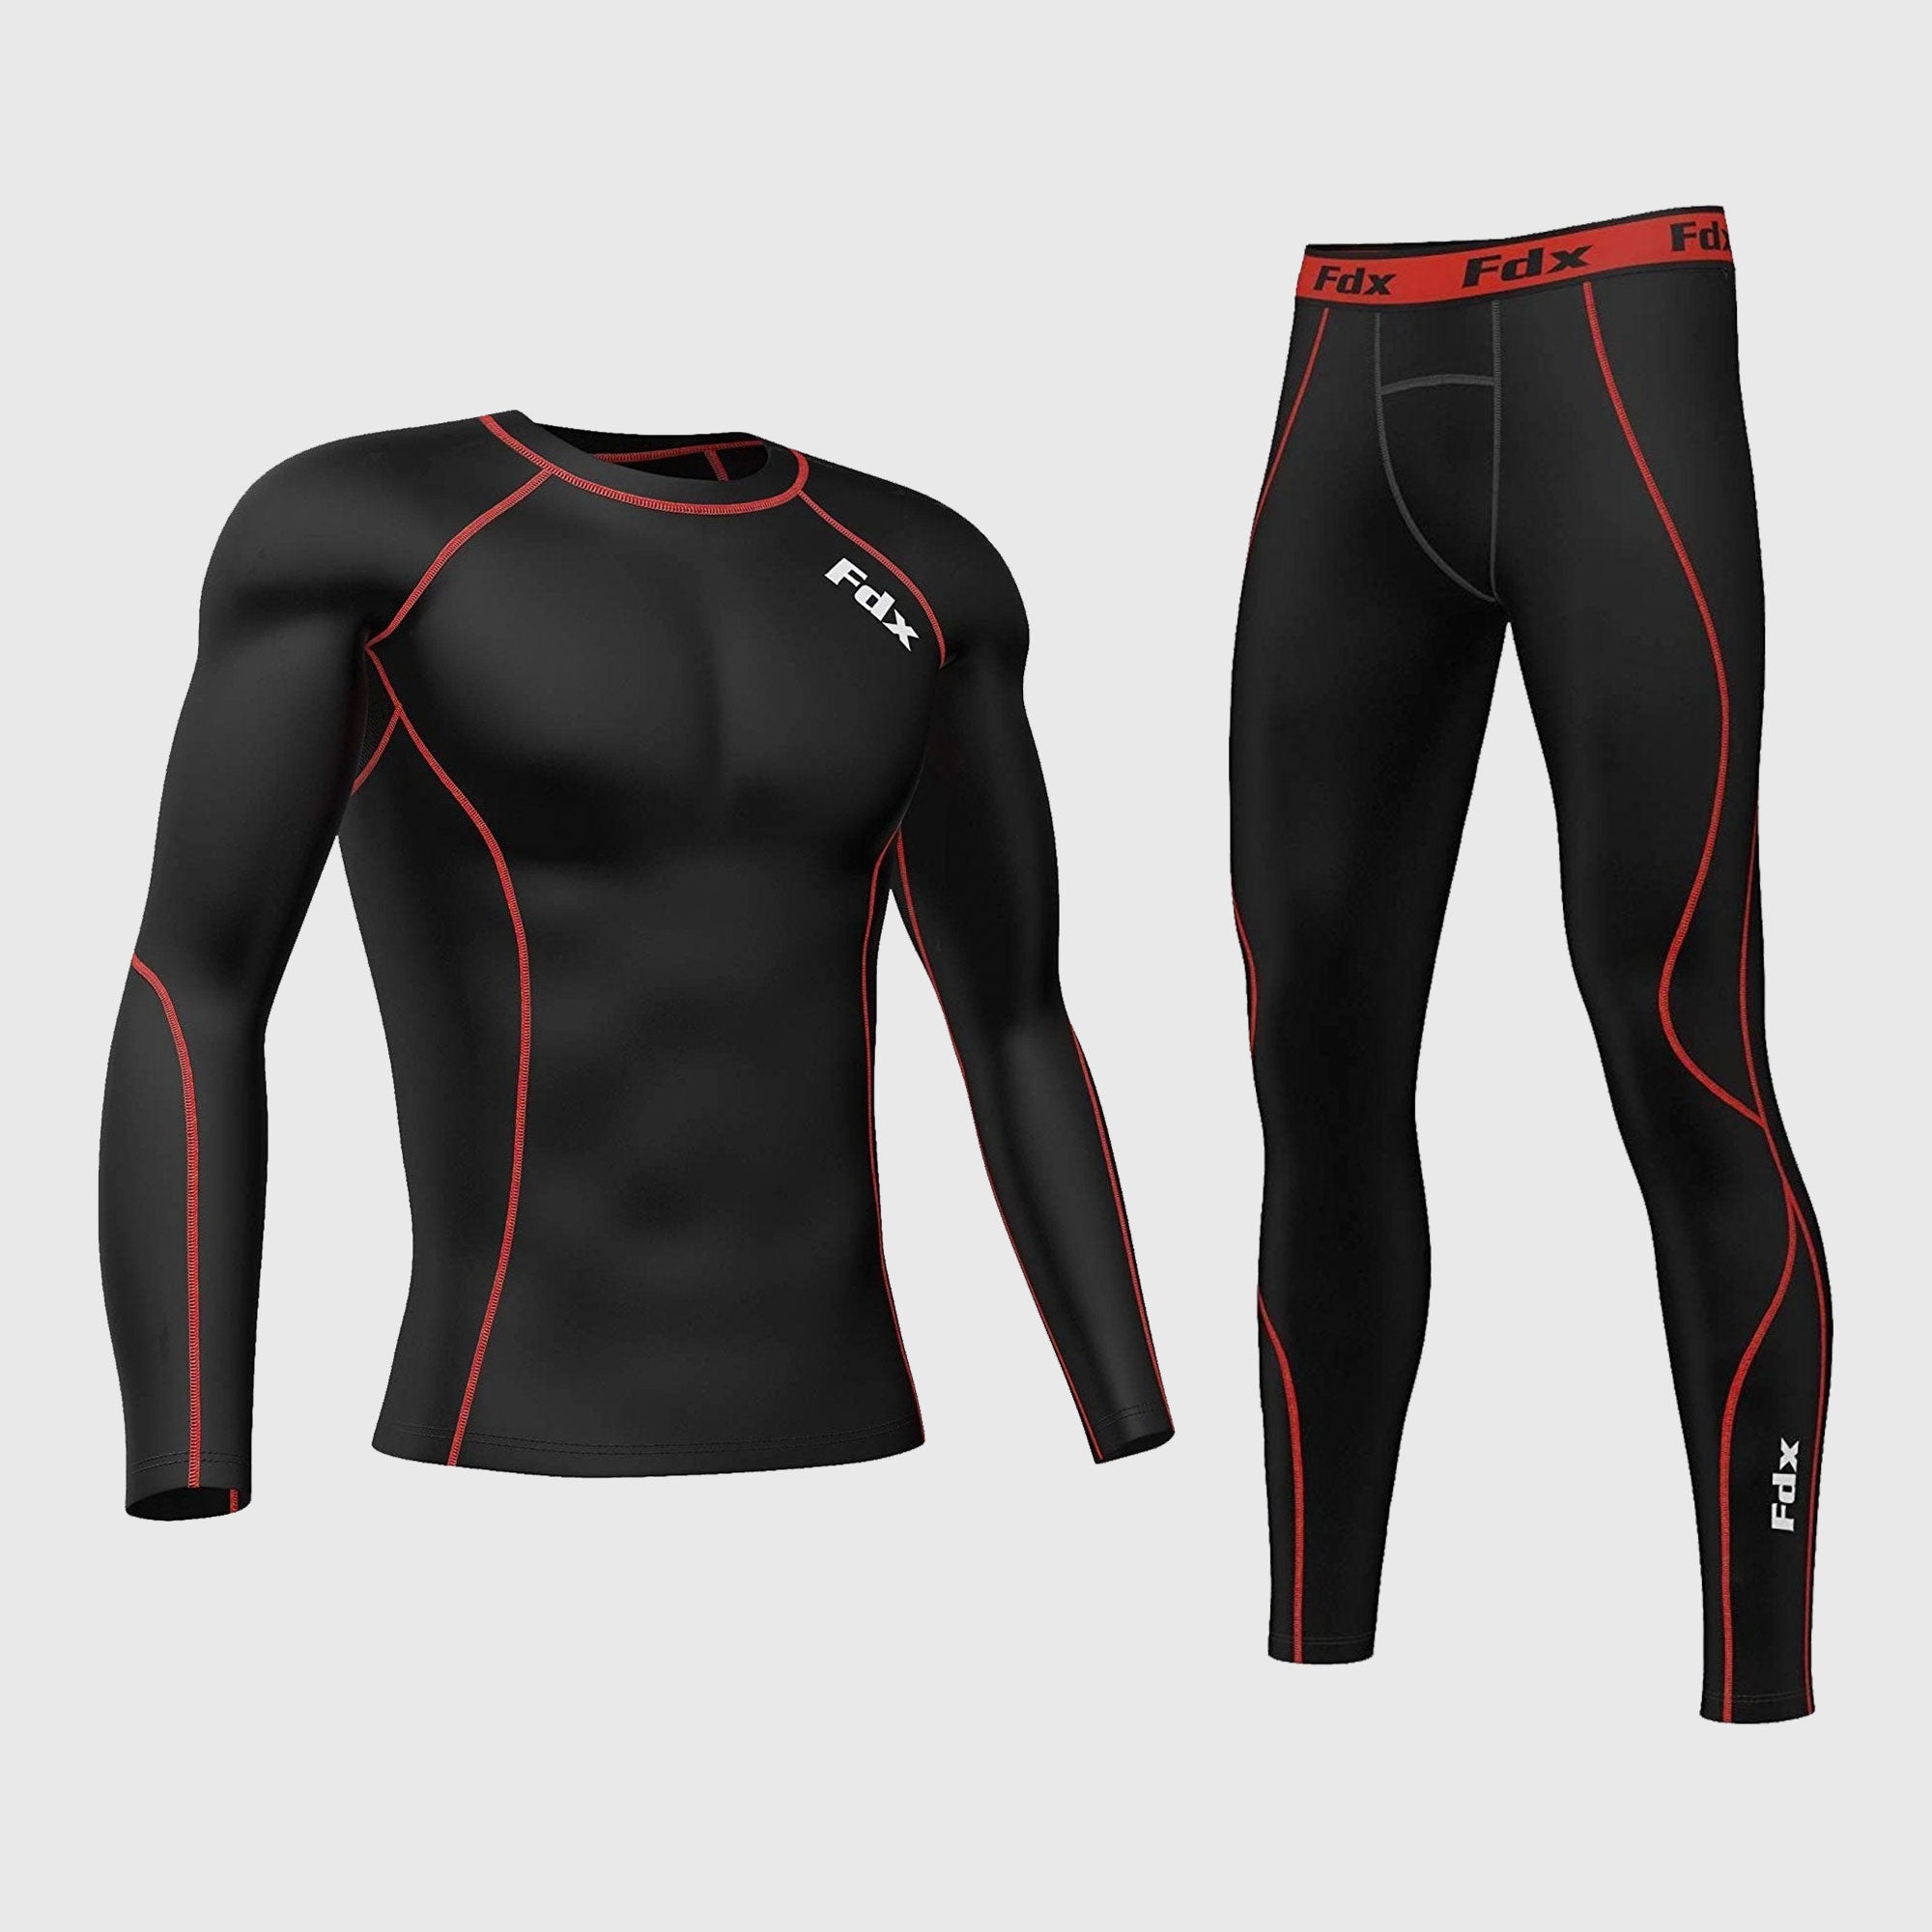 Fdx Mens Black & Red Long Sleeve Compression Top & Compression Tights Base Layer Gym Training Jogging Yoga Fitness Body Wear - Blitz